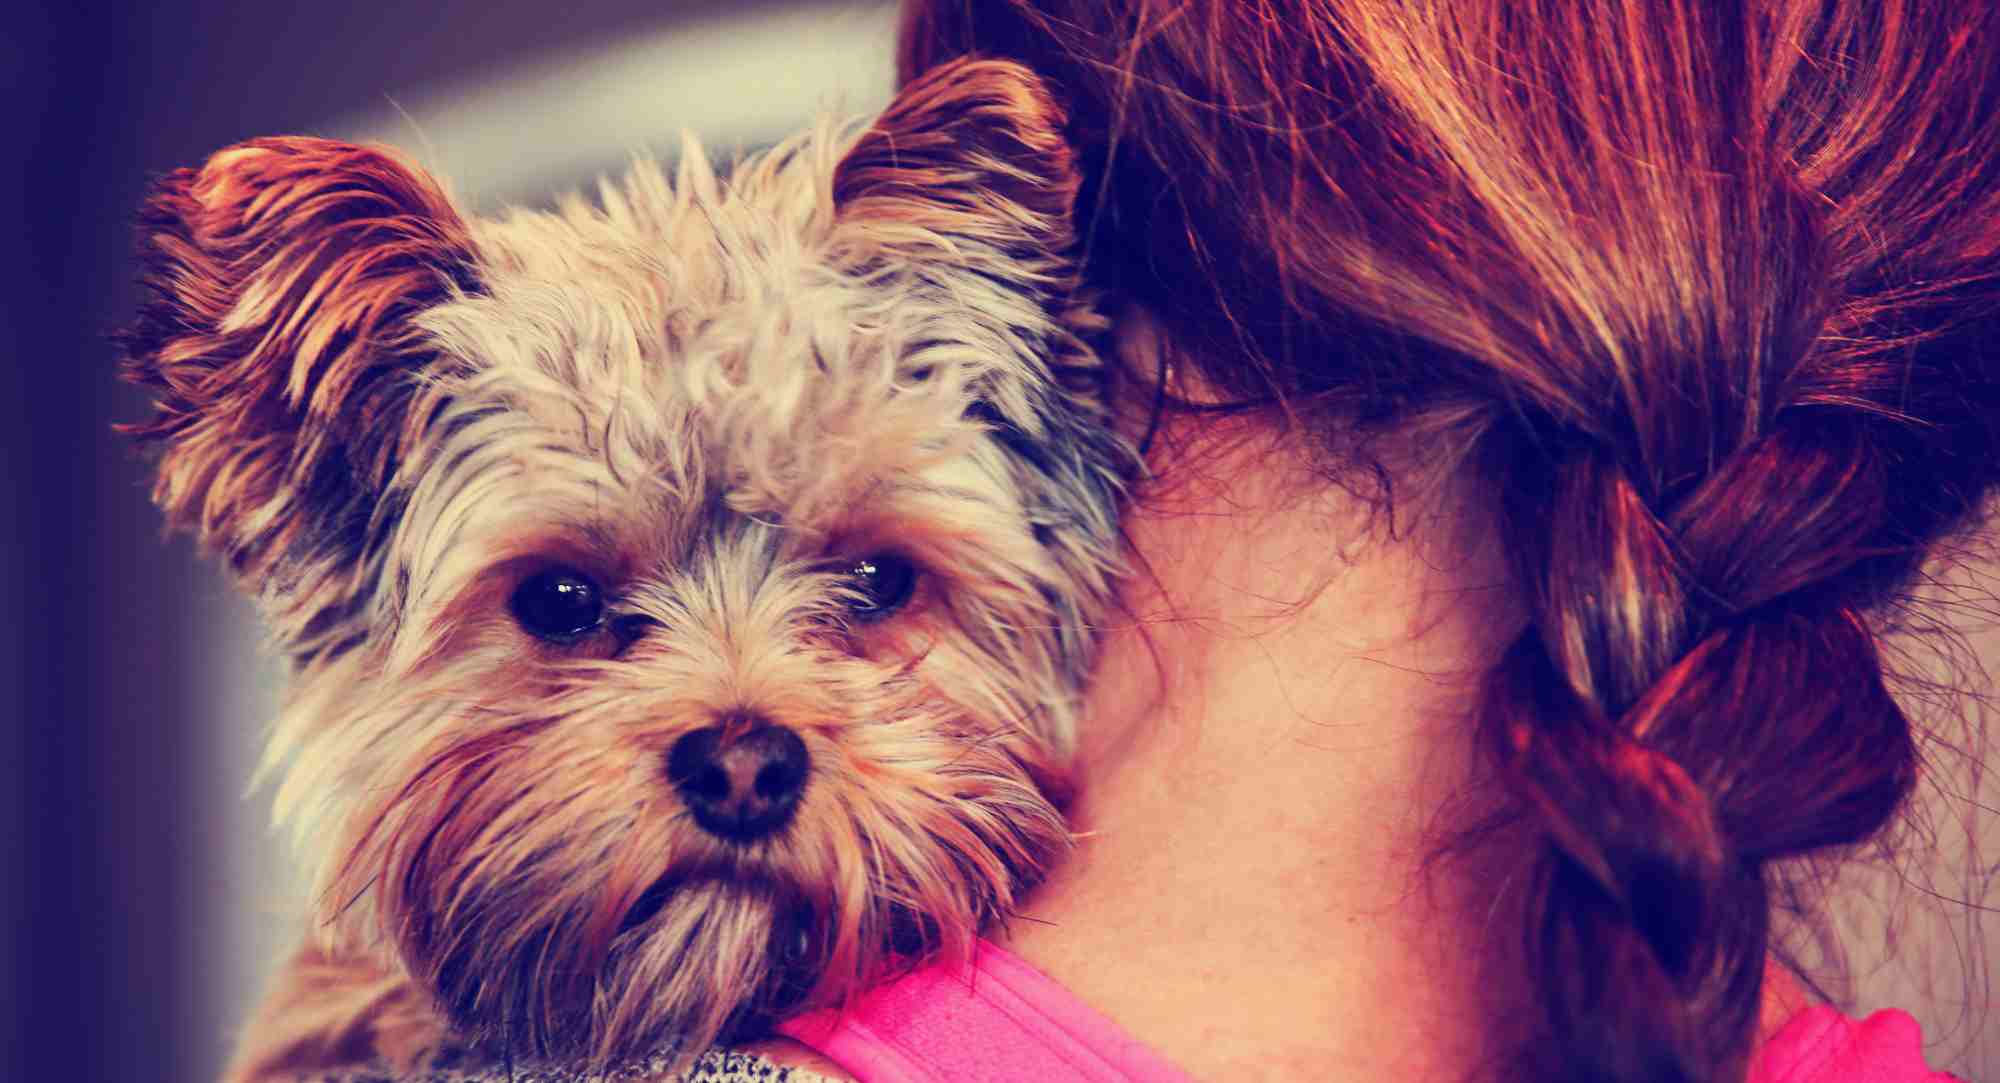 The Yorkie Times - Cute Yorkie looking over a girl with a red braids shoulder